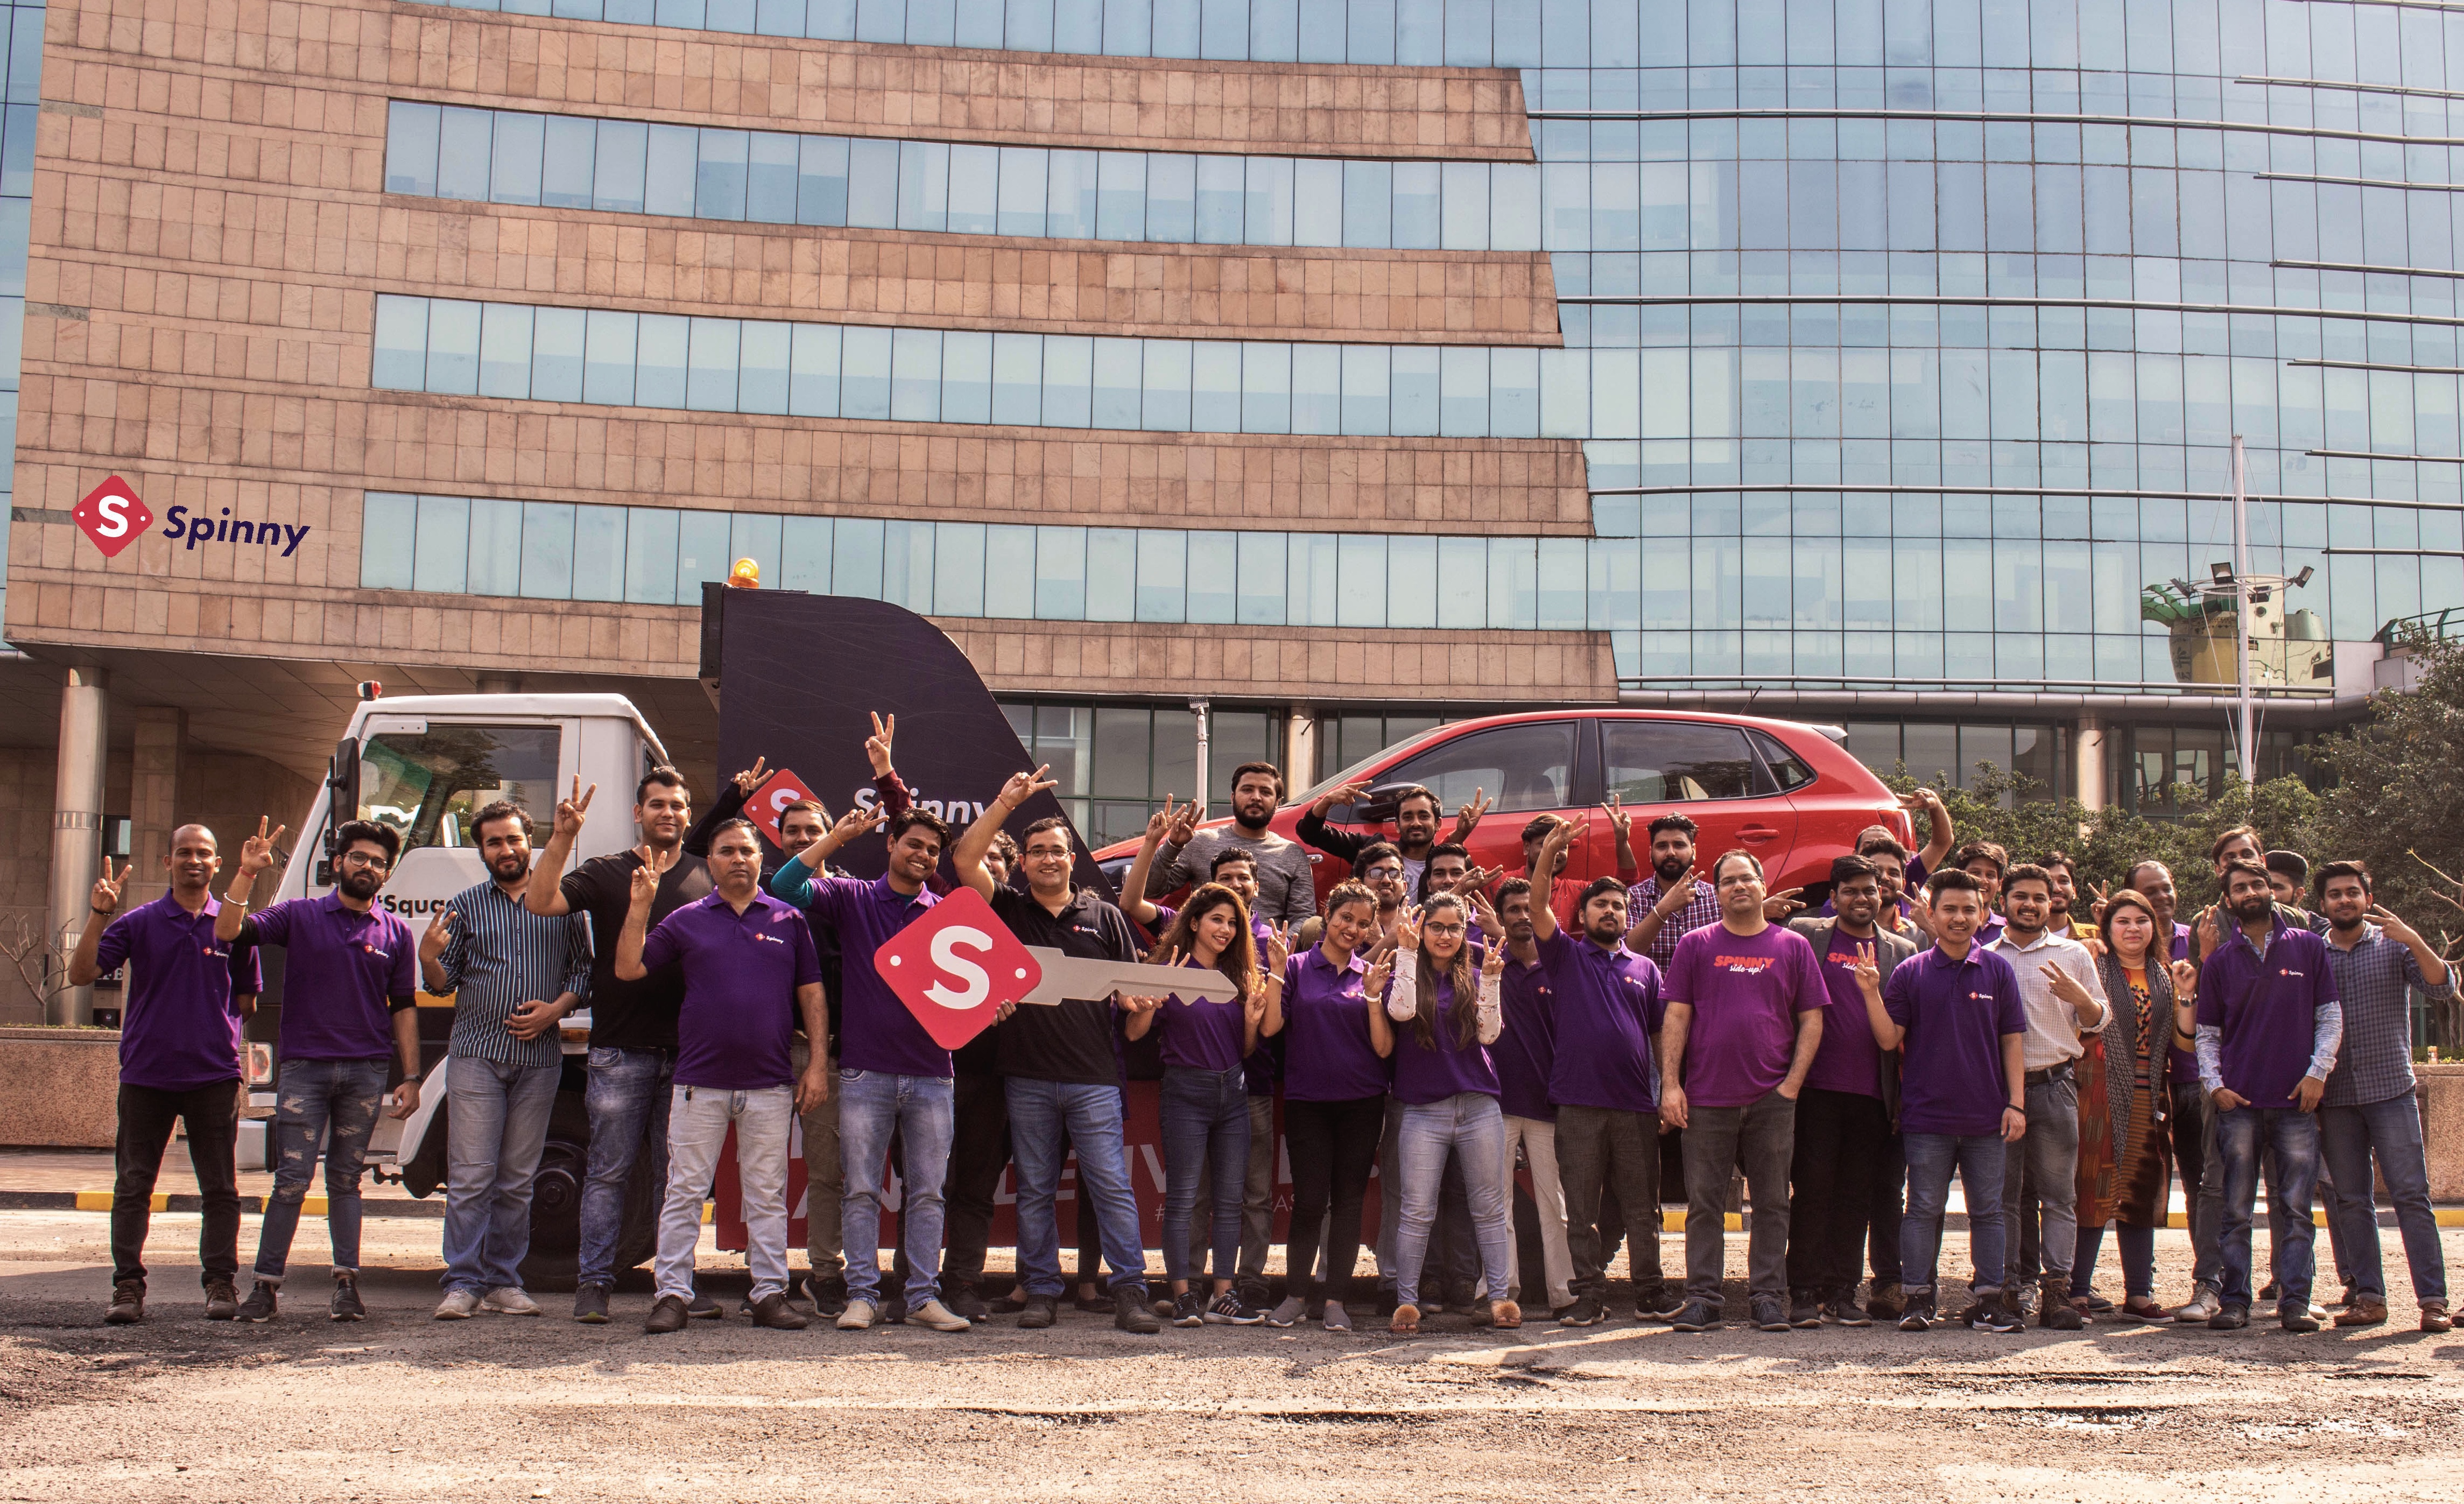 India's Spinny raises $43.7M to expand its online platform for selling used  cars | TechCrunch